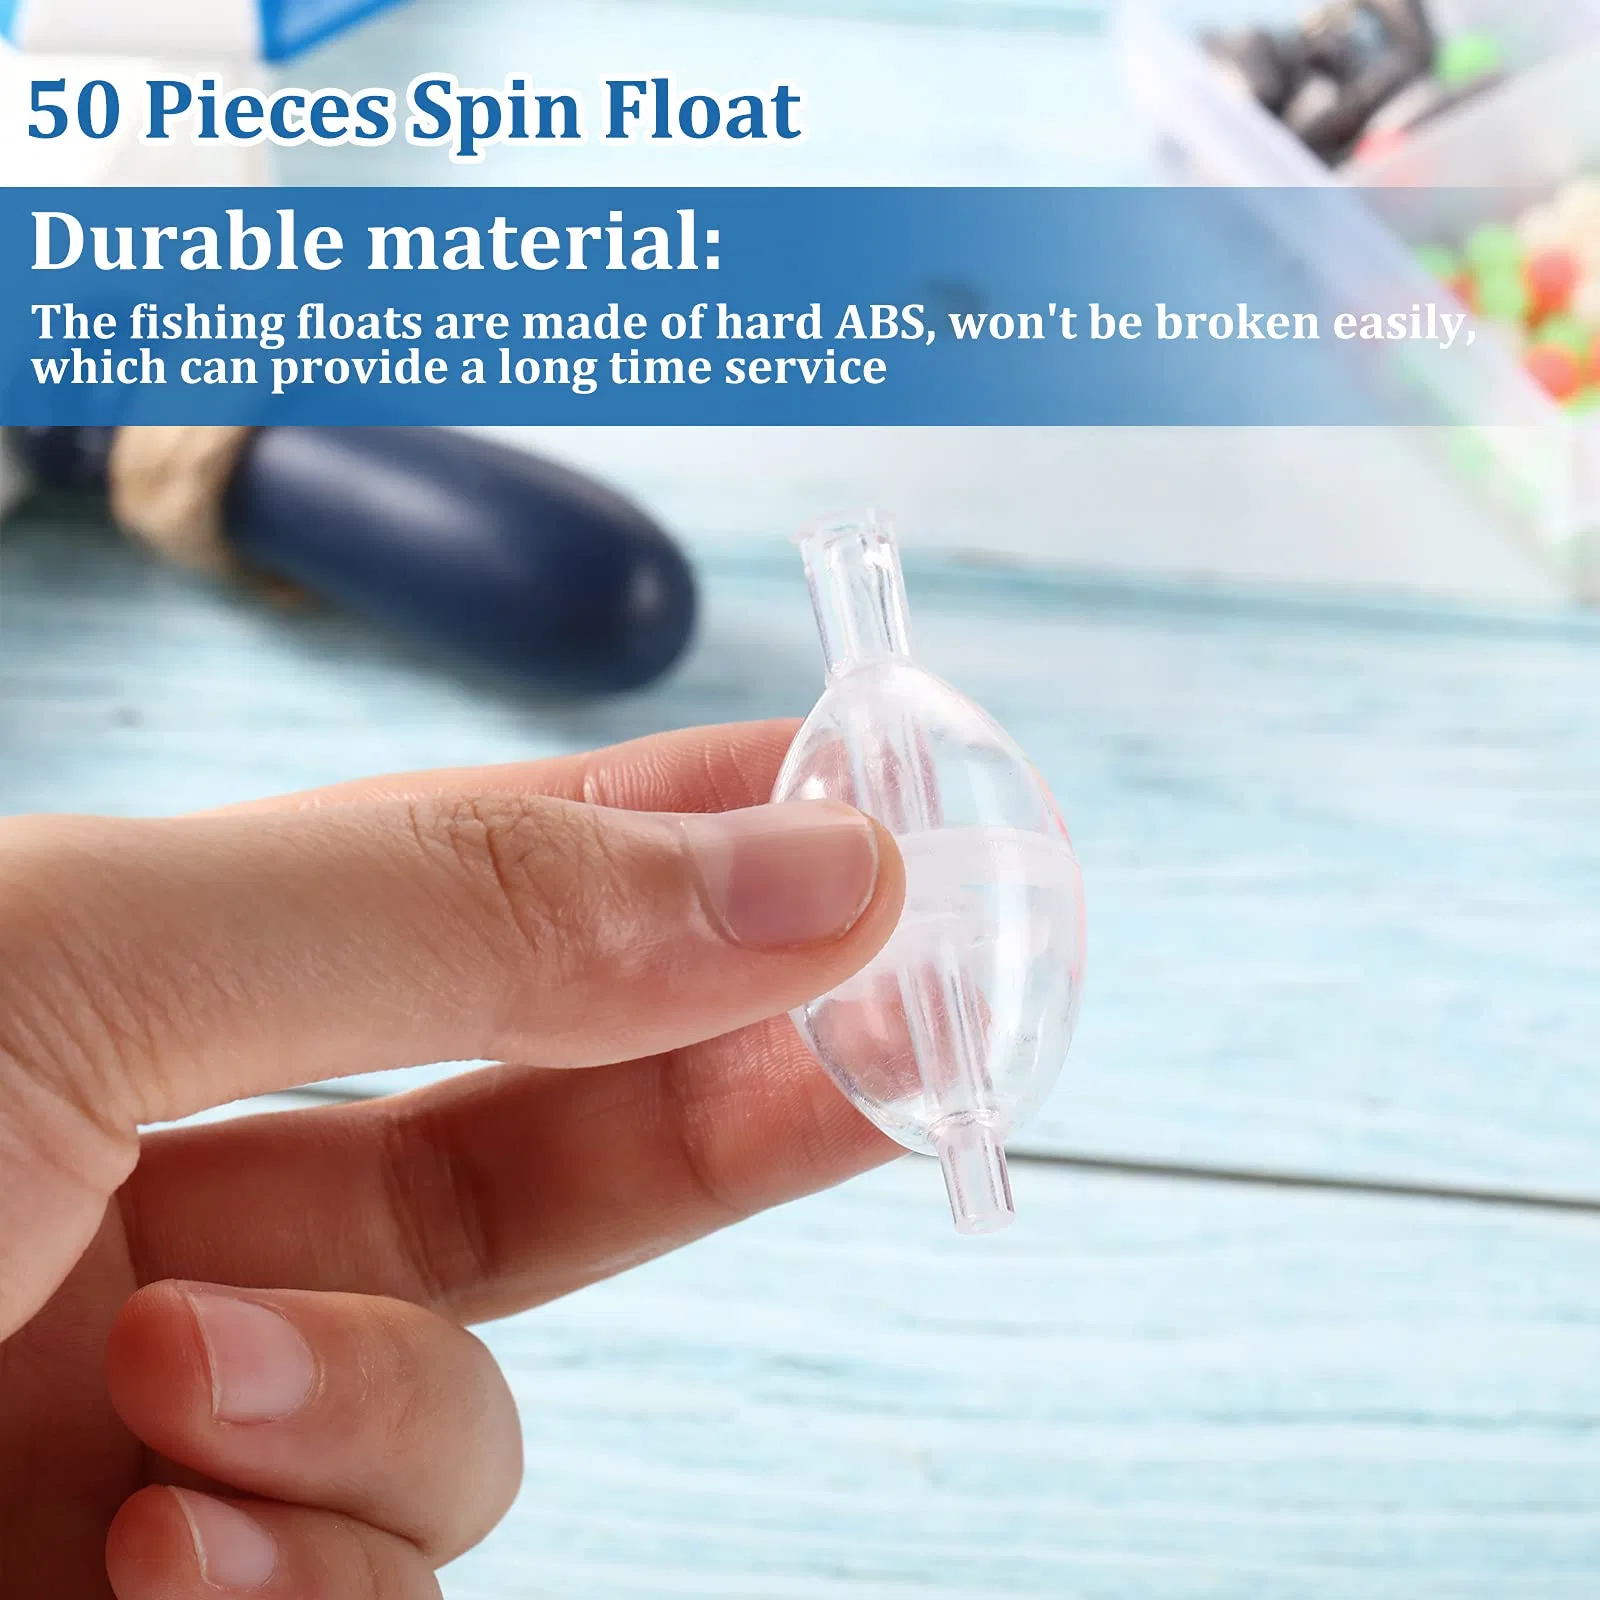 50 Pieces Spin Tackle Accessories Reliable Practical Useful Material Fishing Float